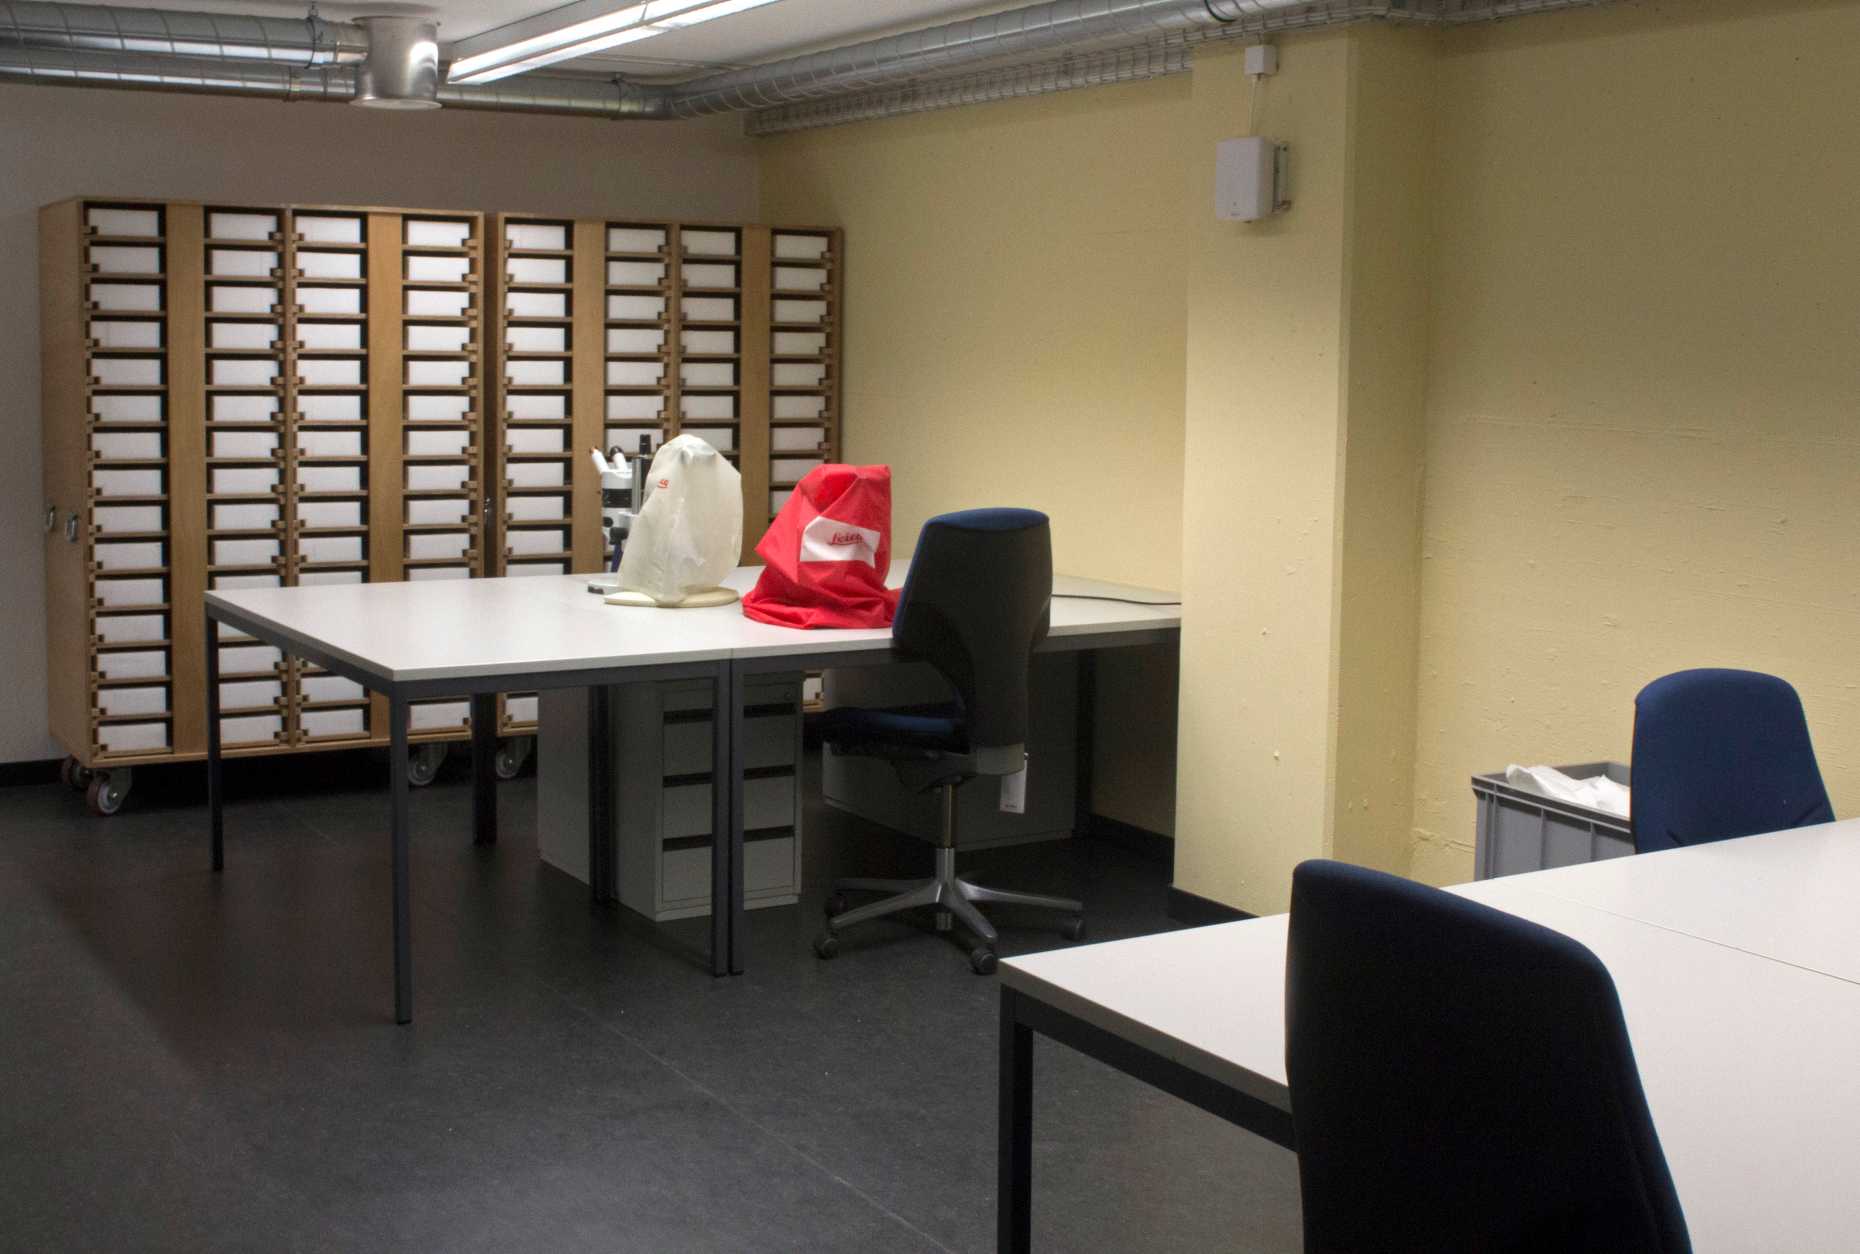 Enlarged view: Work spaces in the collection